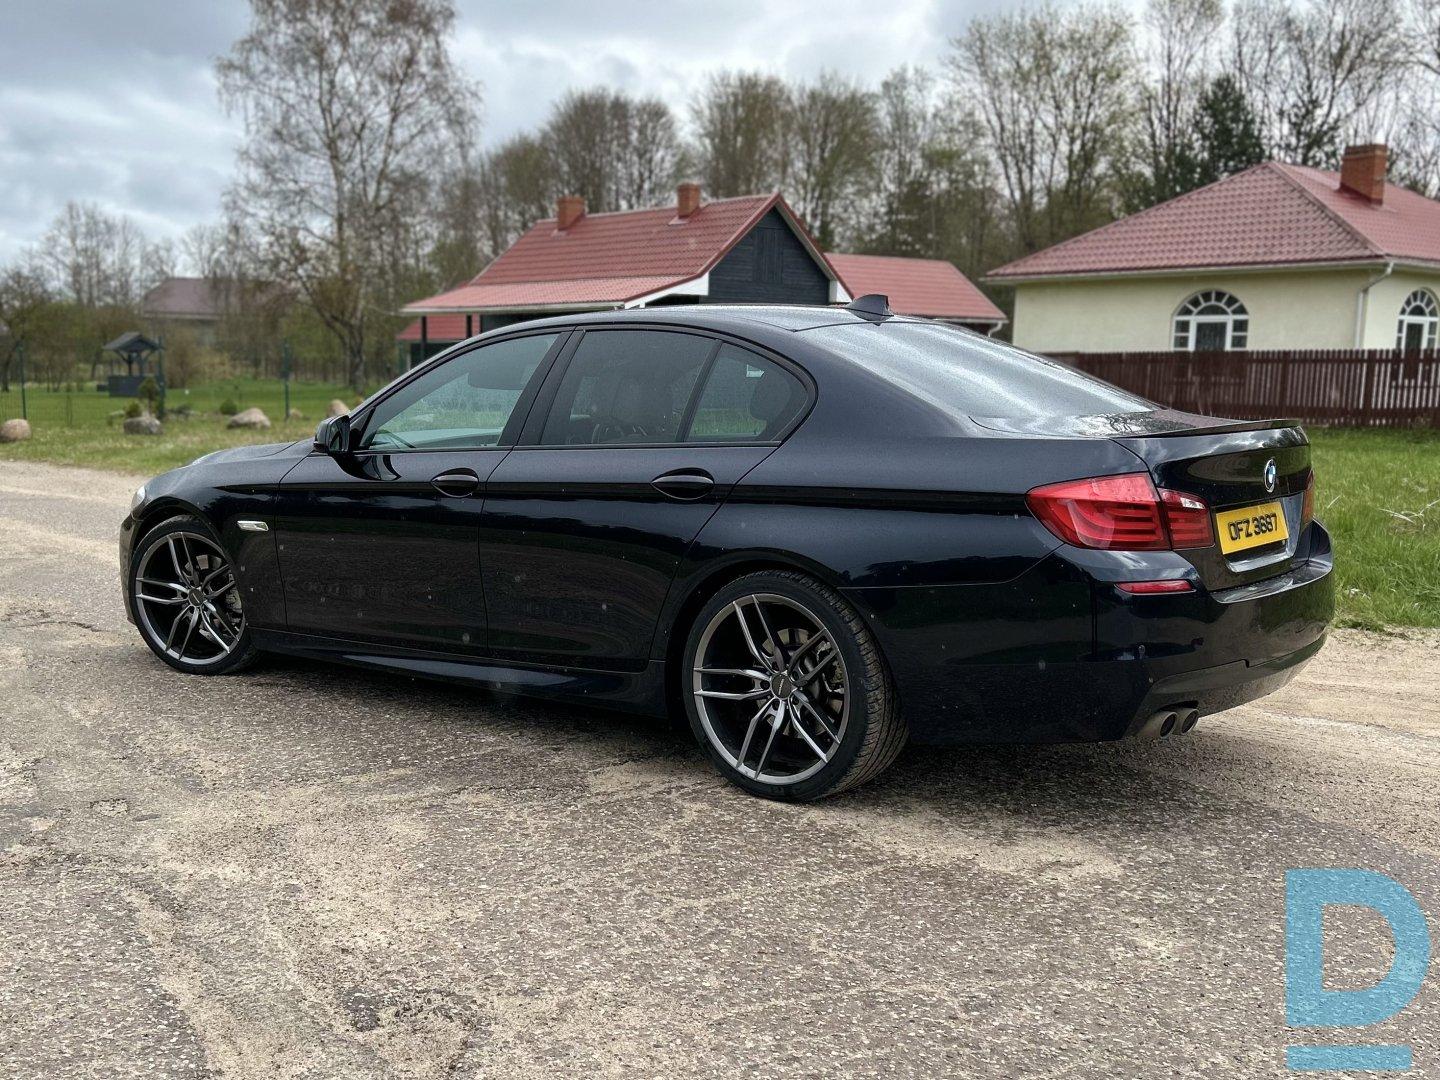 For sale BMW 520, 2012
 6500.00 €
 Model
 520 f10
 Condition
 Used
 Slud. Type
 For s